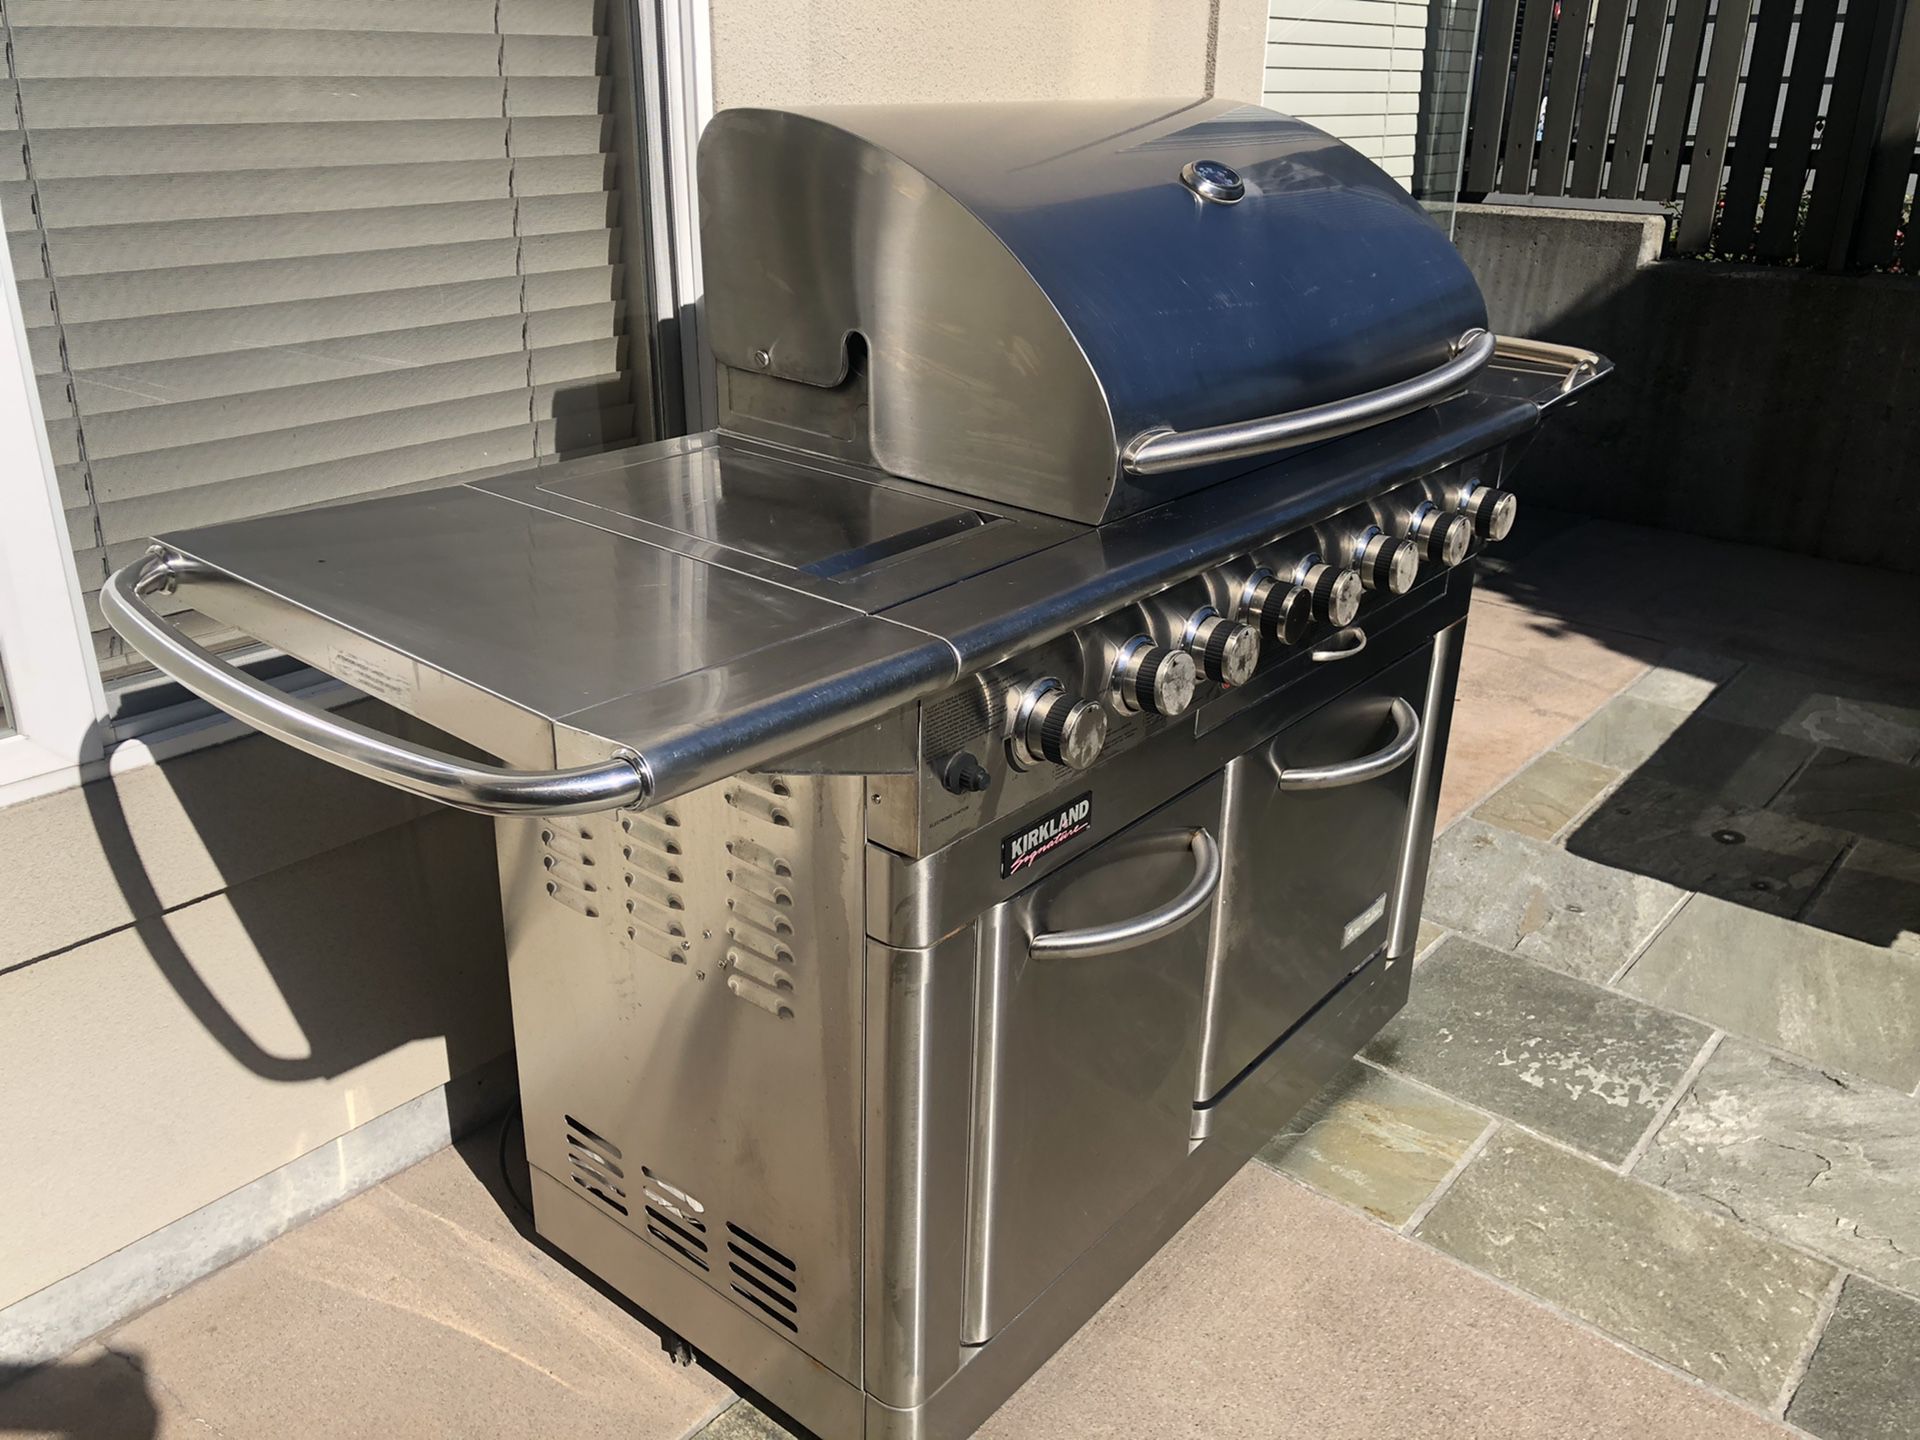 Kirkland Signature Barbecue with Oven and side burner